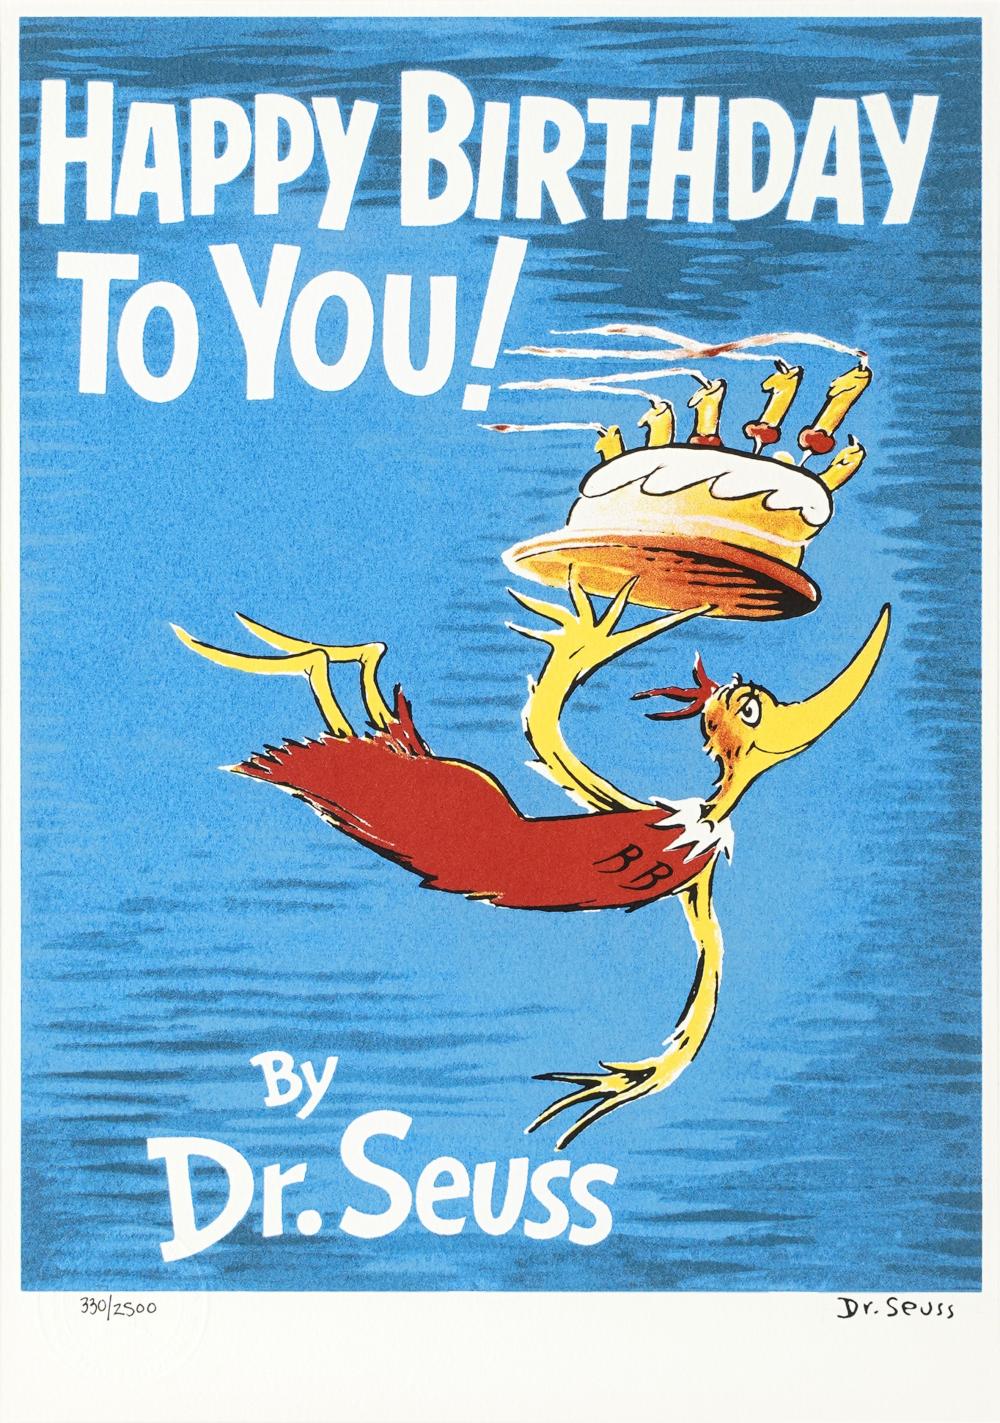 DR SEUSS THEODORE S GIESEL  3034ff